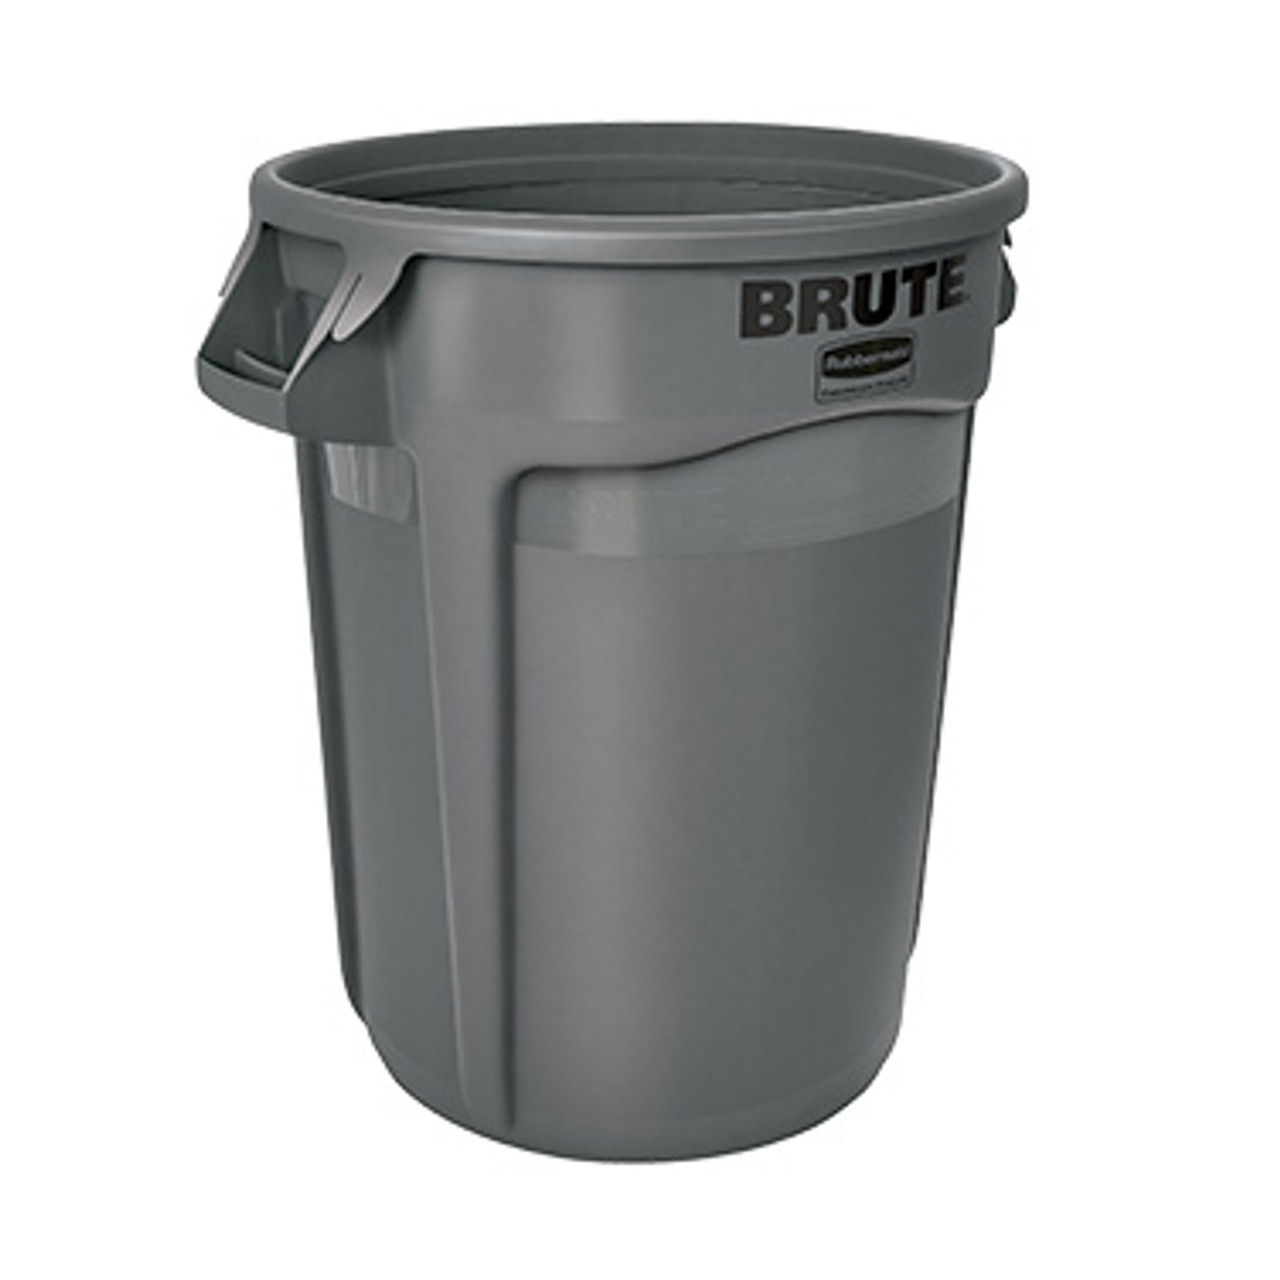 https://cdn11.bigcommerce.com/s-g3i86bef61/images/stencil/1280x1280/products/4069/2567/Rubbermaid-FG263200GRAY-ProSave-BRUTE-Trash-Can__26256.1664906353.jpg?c=1